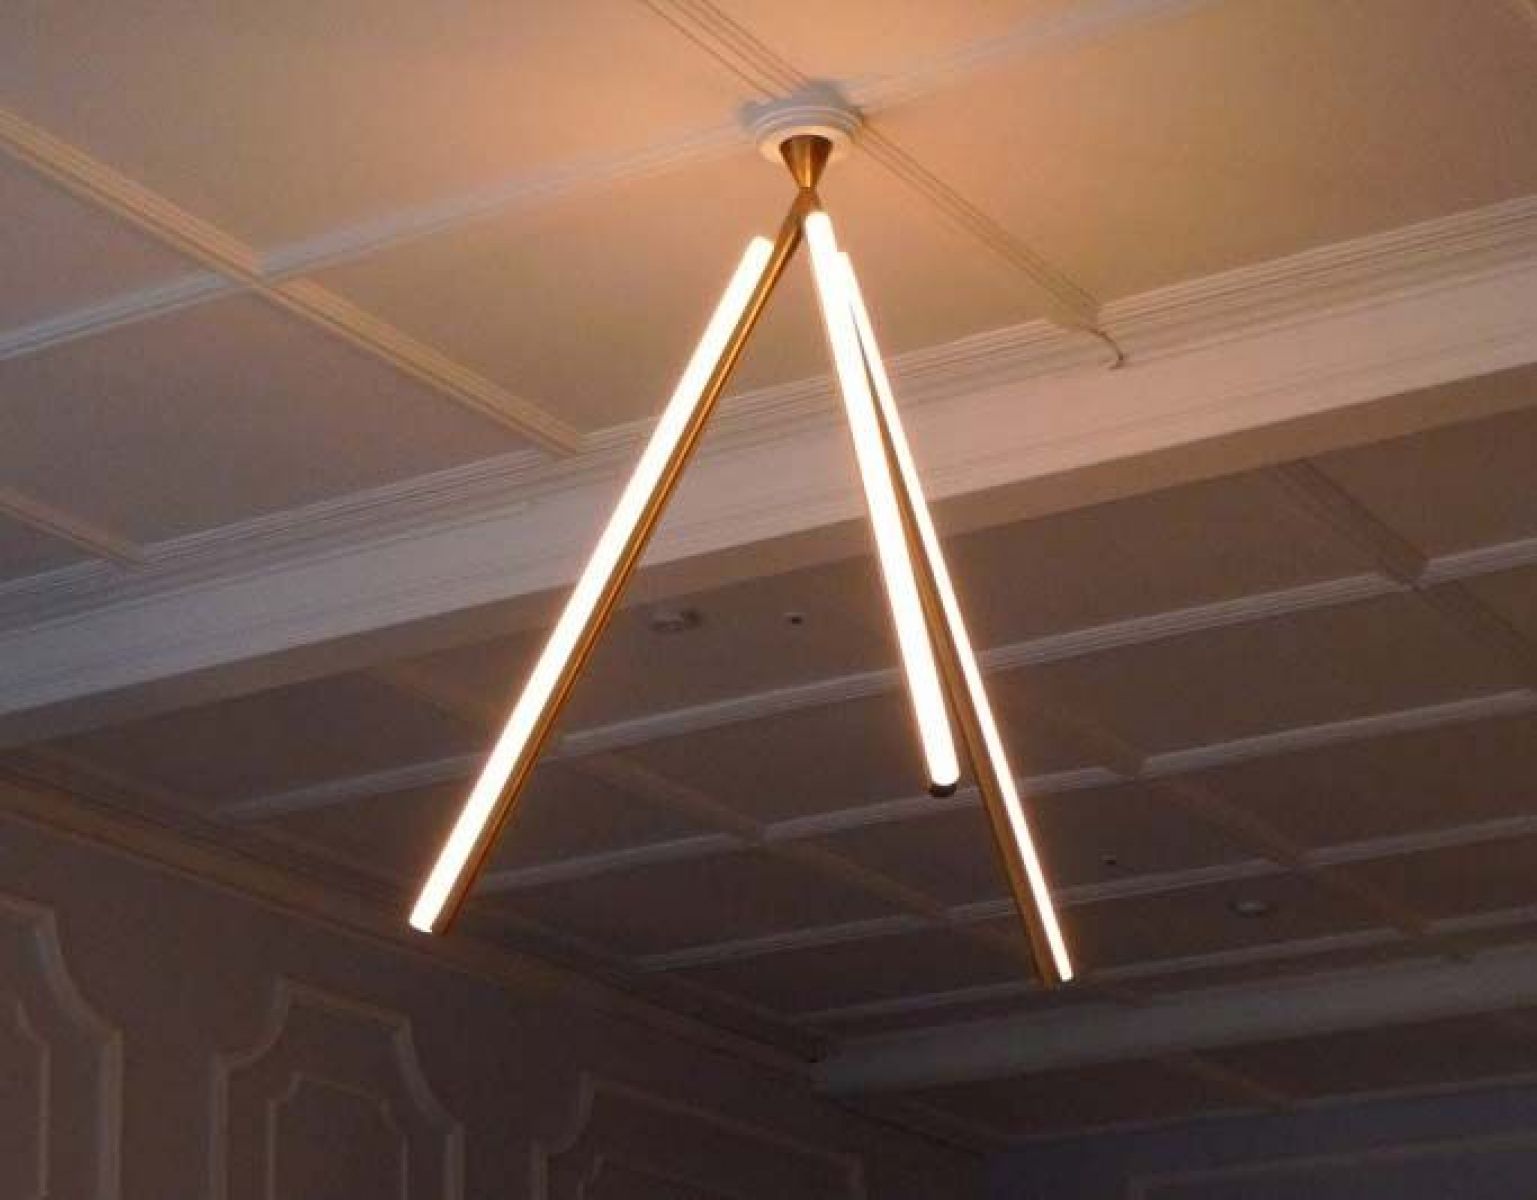 Lampada a sospensione Ceiling Mounted Lit Lines Collection Michael Anastassiades pic-1